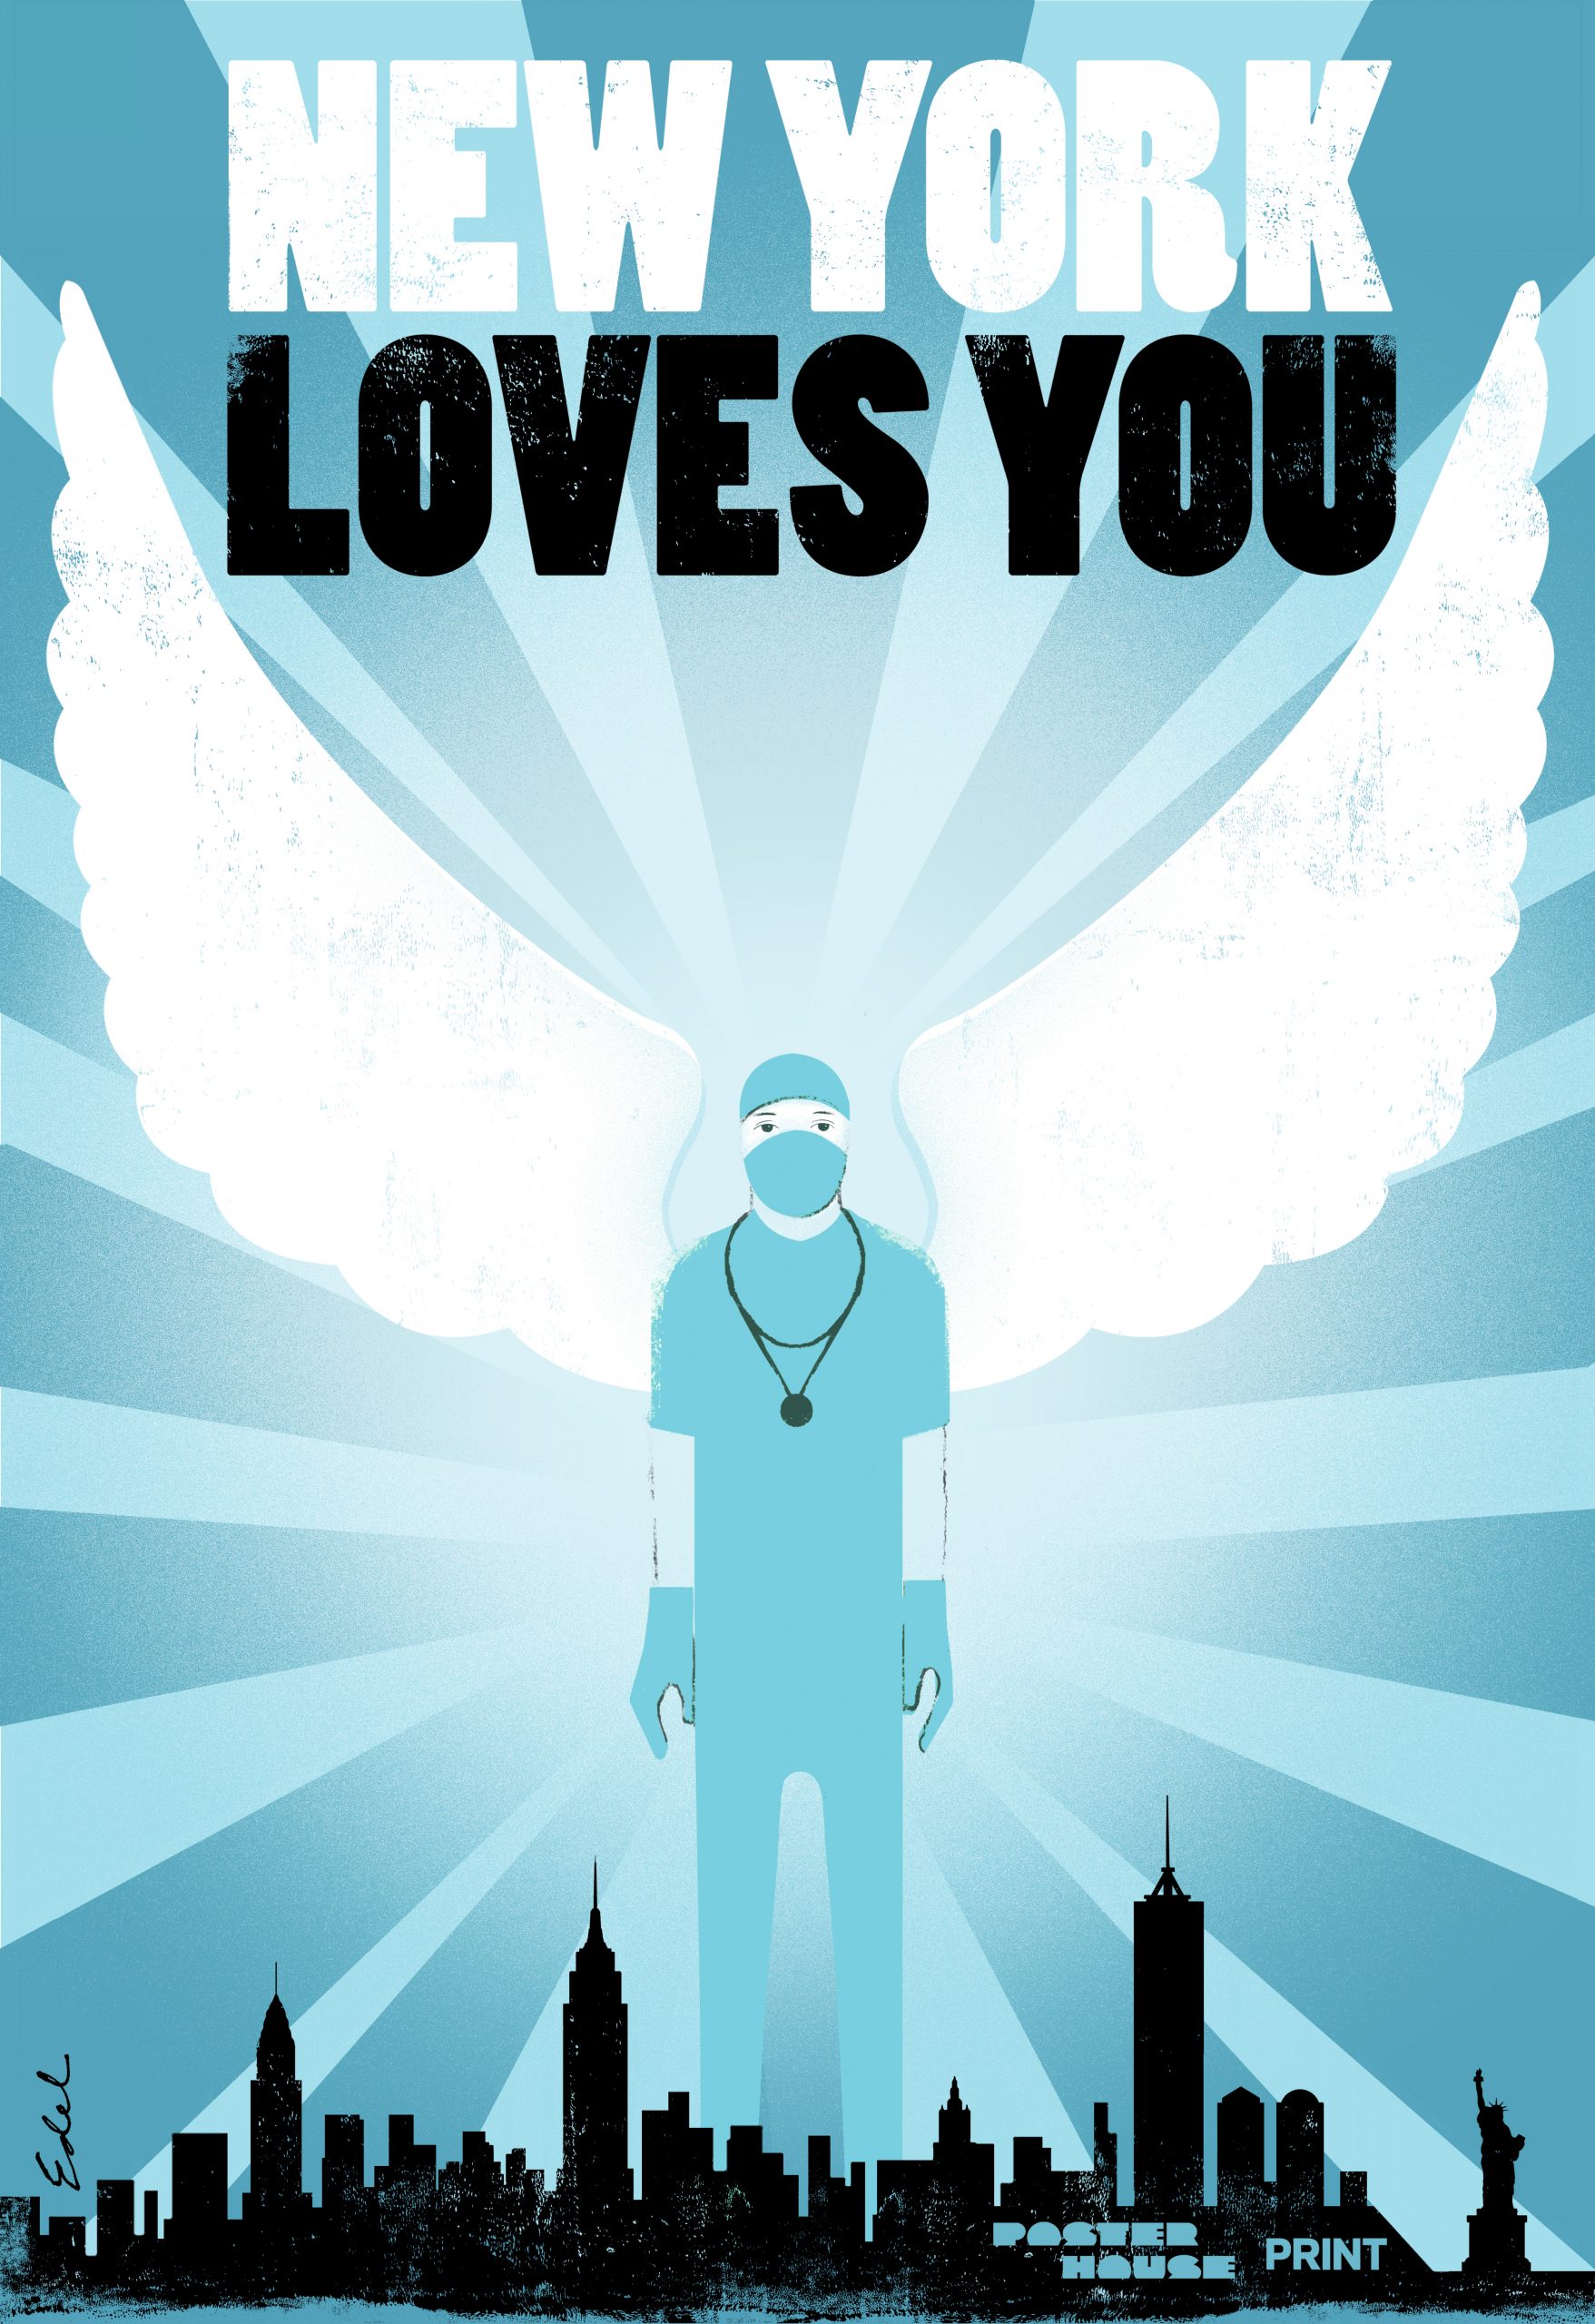 An illustrative poster of a nurse with wings rising behind the NYC skyline.